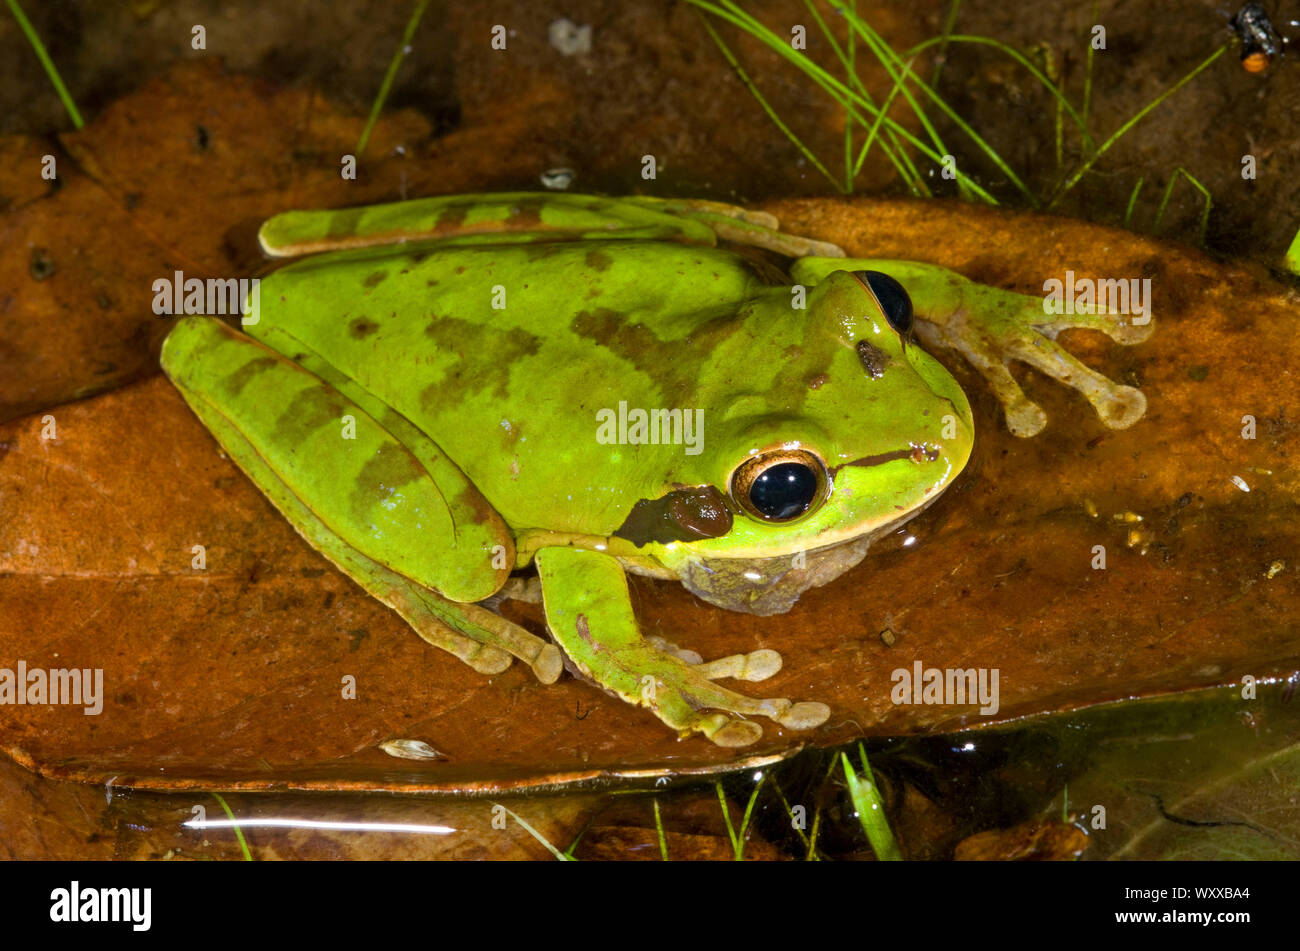 The New Granada cross-banded tree frog (Smilisca phaeota) is found in Central and South America. Its upper side is normally tan during the day but can Stock Photo